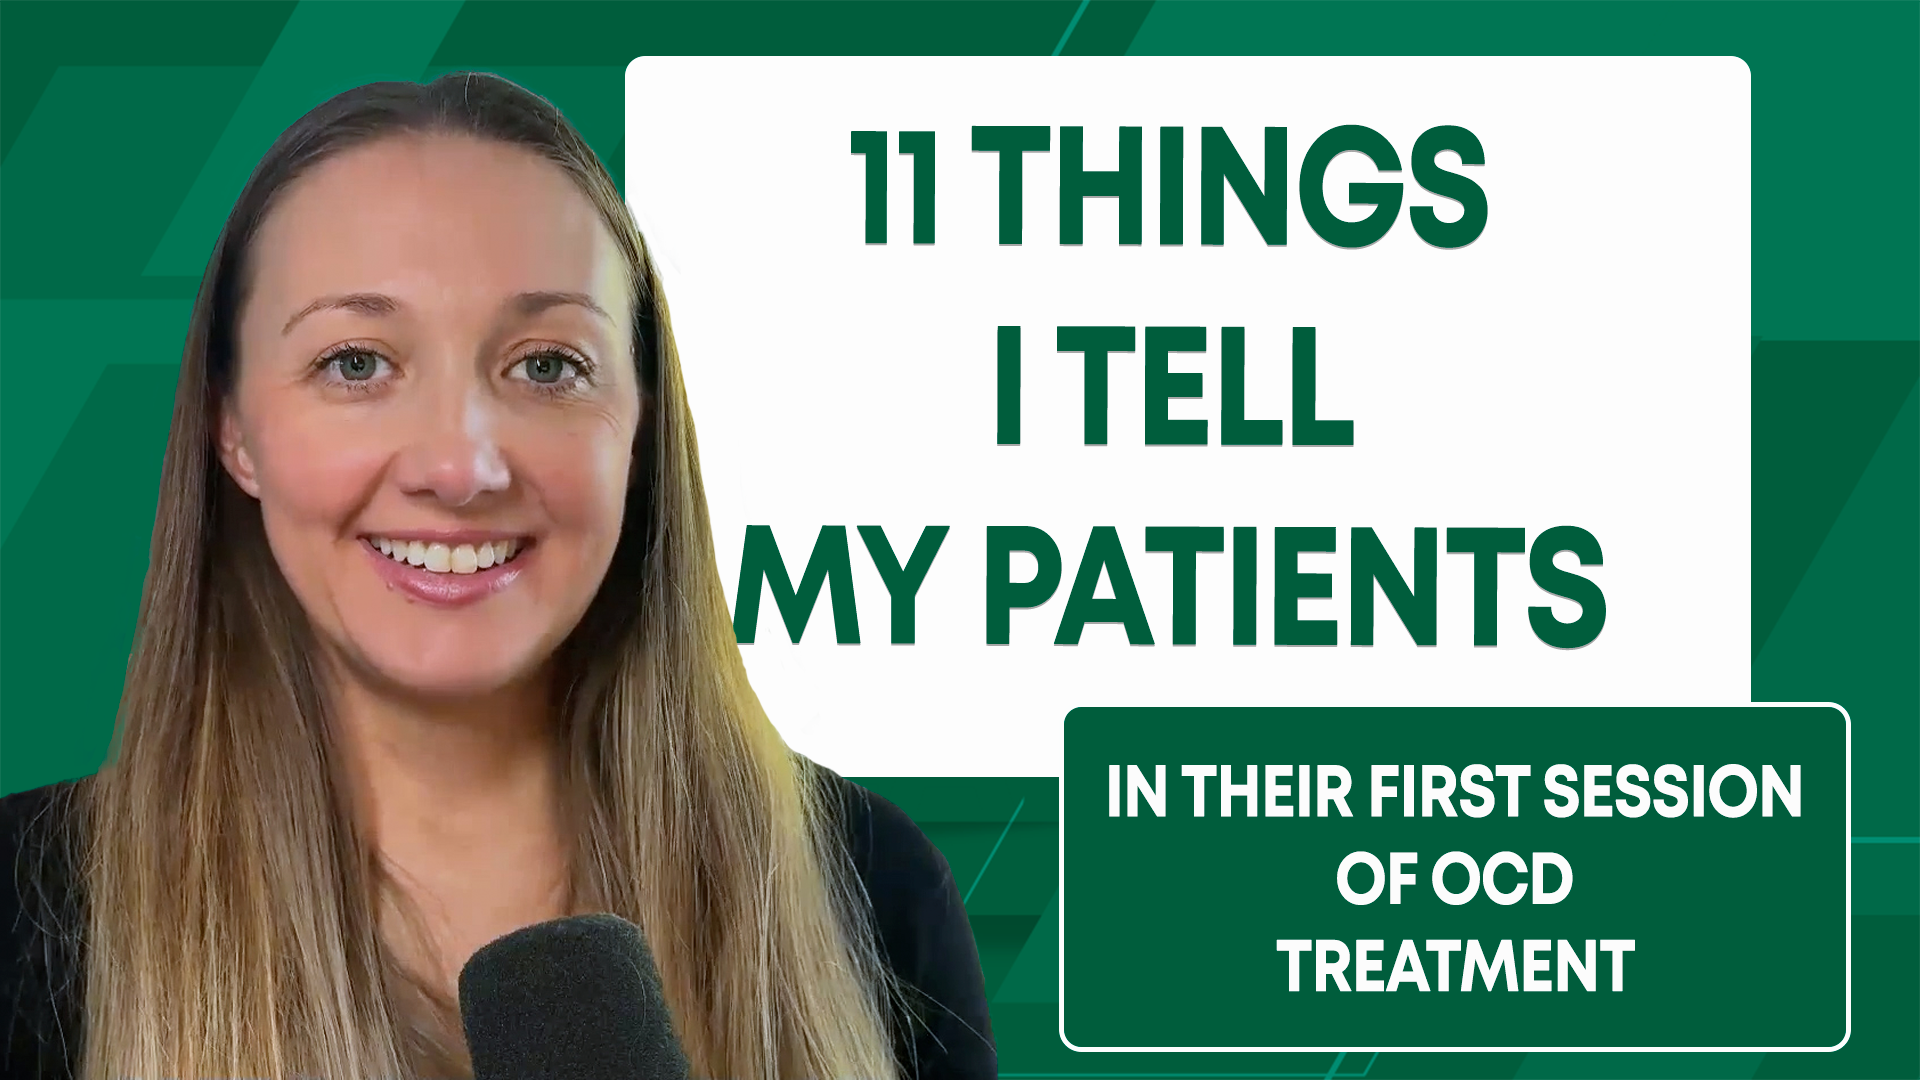 EP 378 11 Things I tell my patients in their first session of OCD treatment